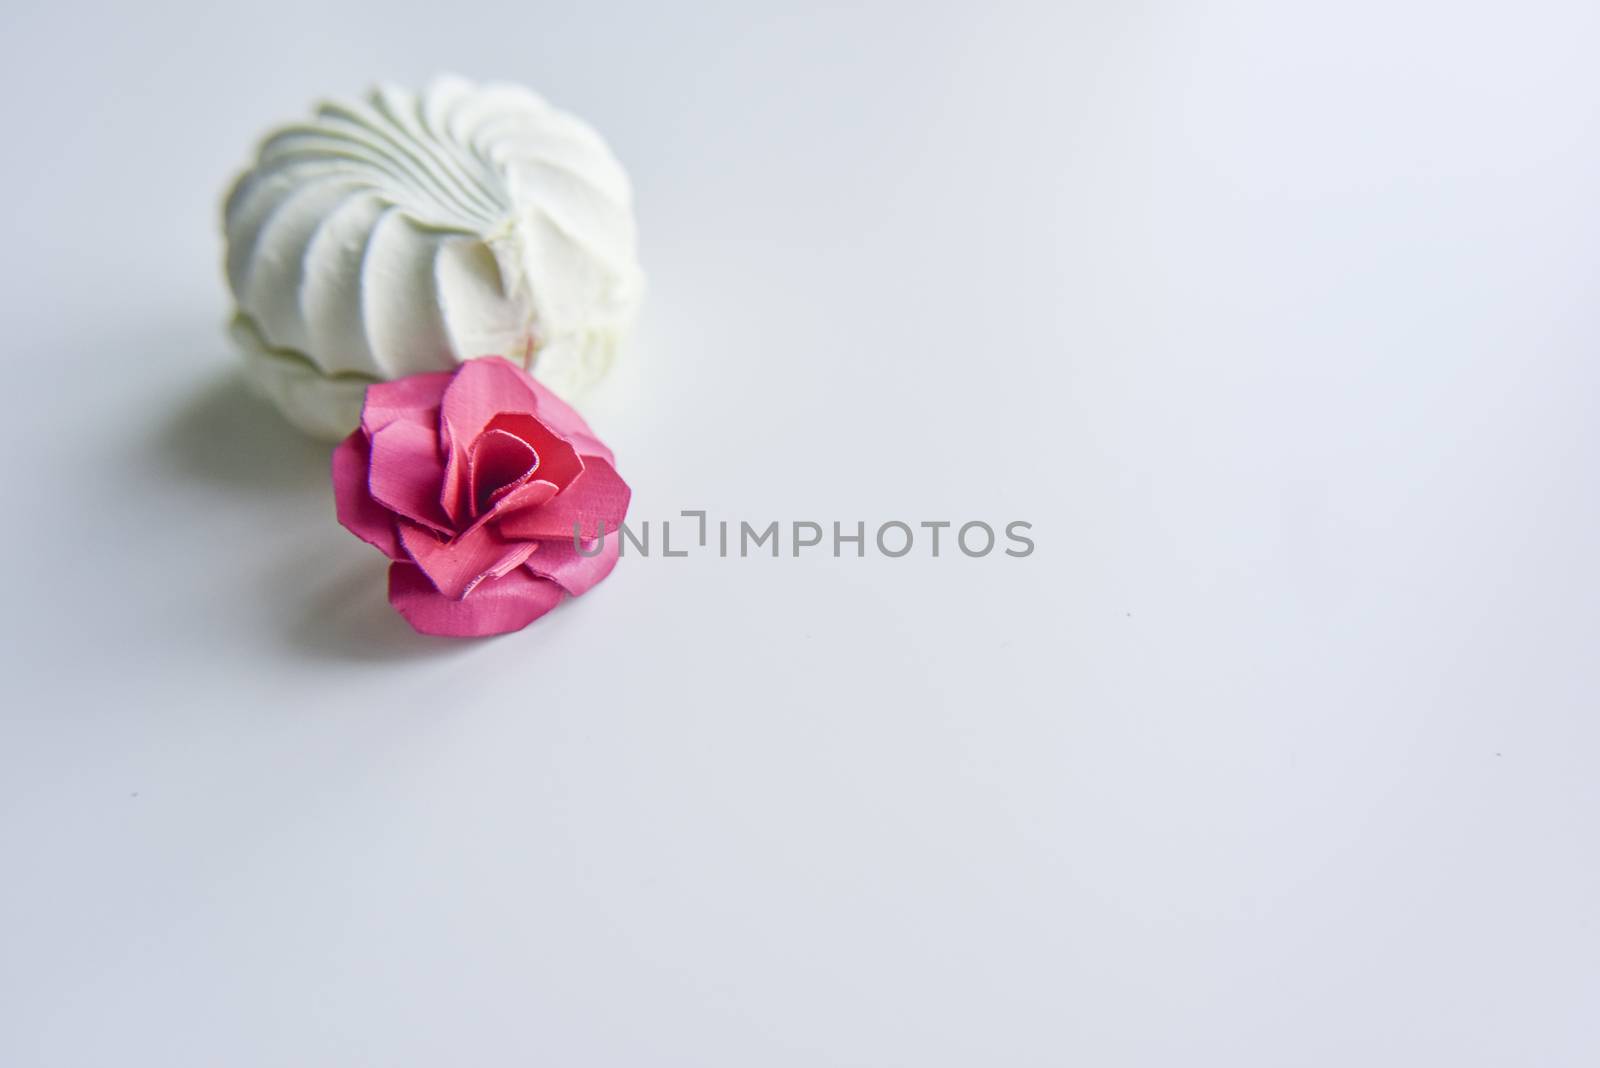 selective focus at the light green marshmallow on the light background with fuchsia flower